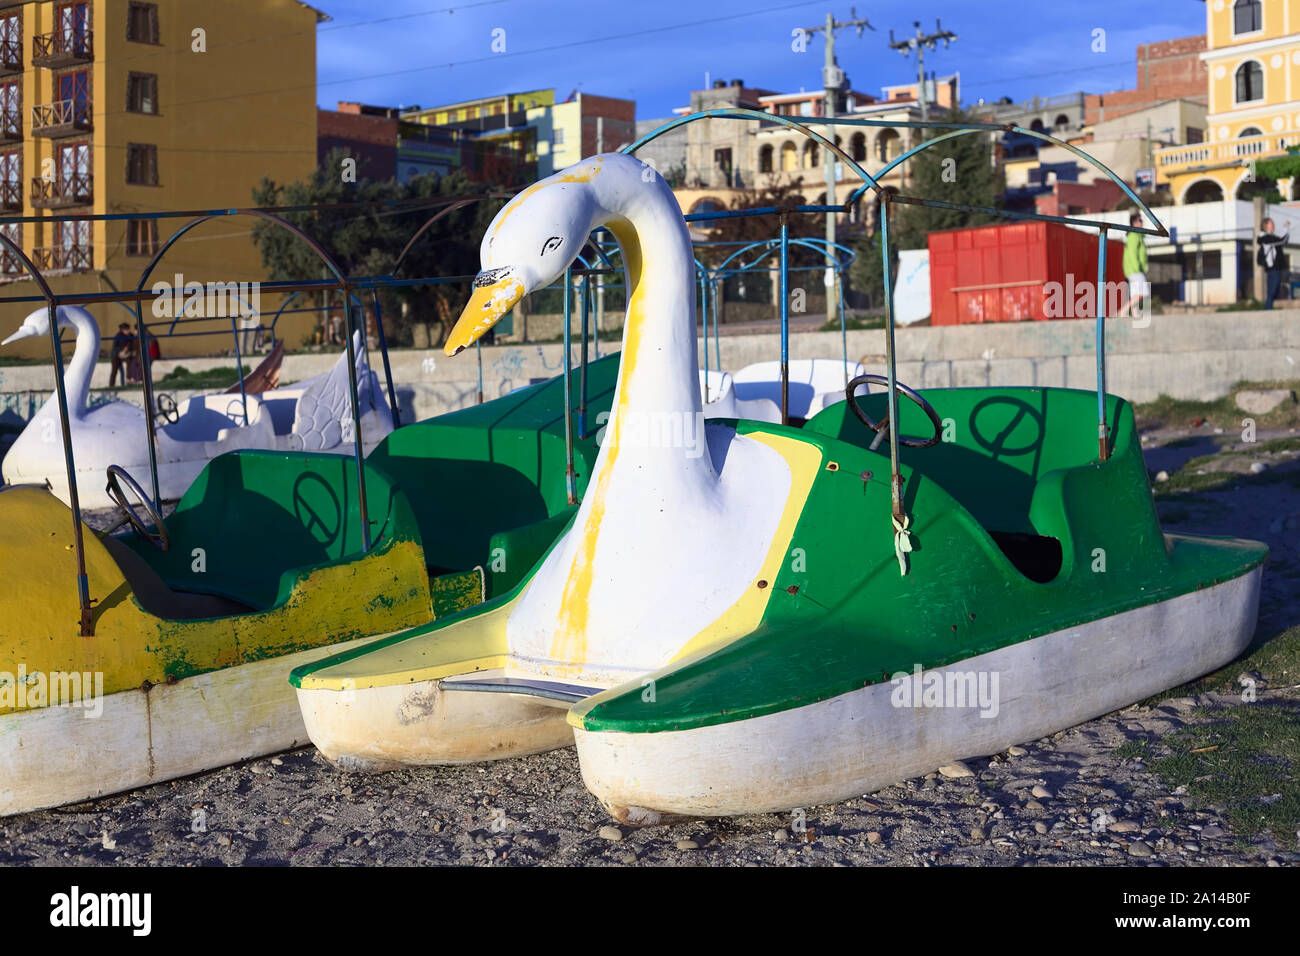 COPACABANA, BOLIVIA - OCTOBER 17, 2014: White and green swan shaped pedal boat on the shore of Lake Titicaca in Copacabana, Bolivia Stock Photo